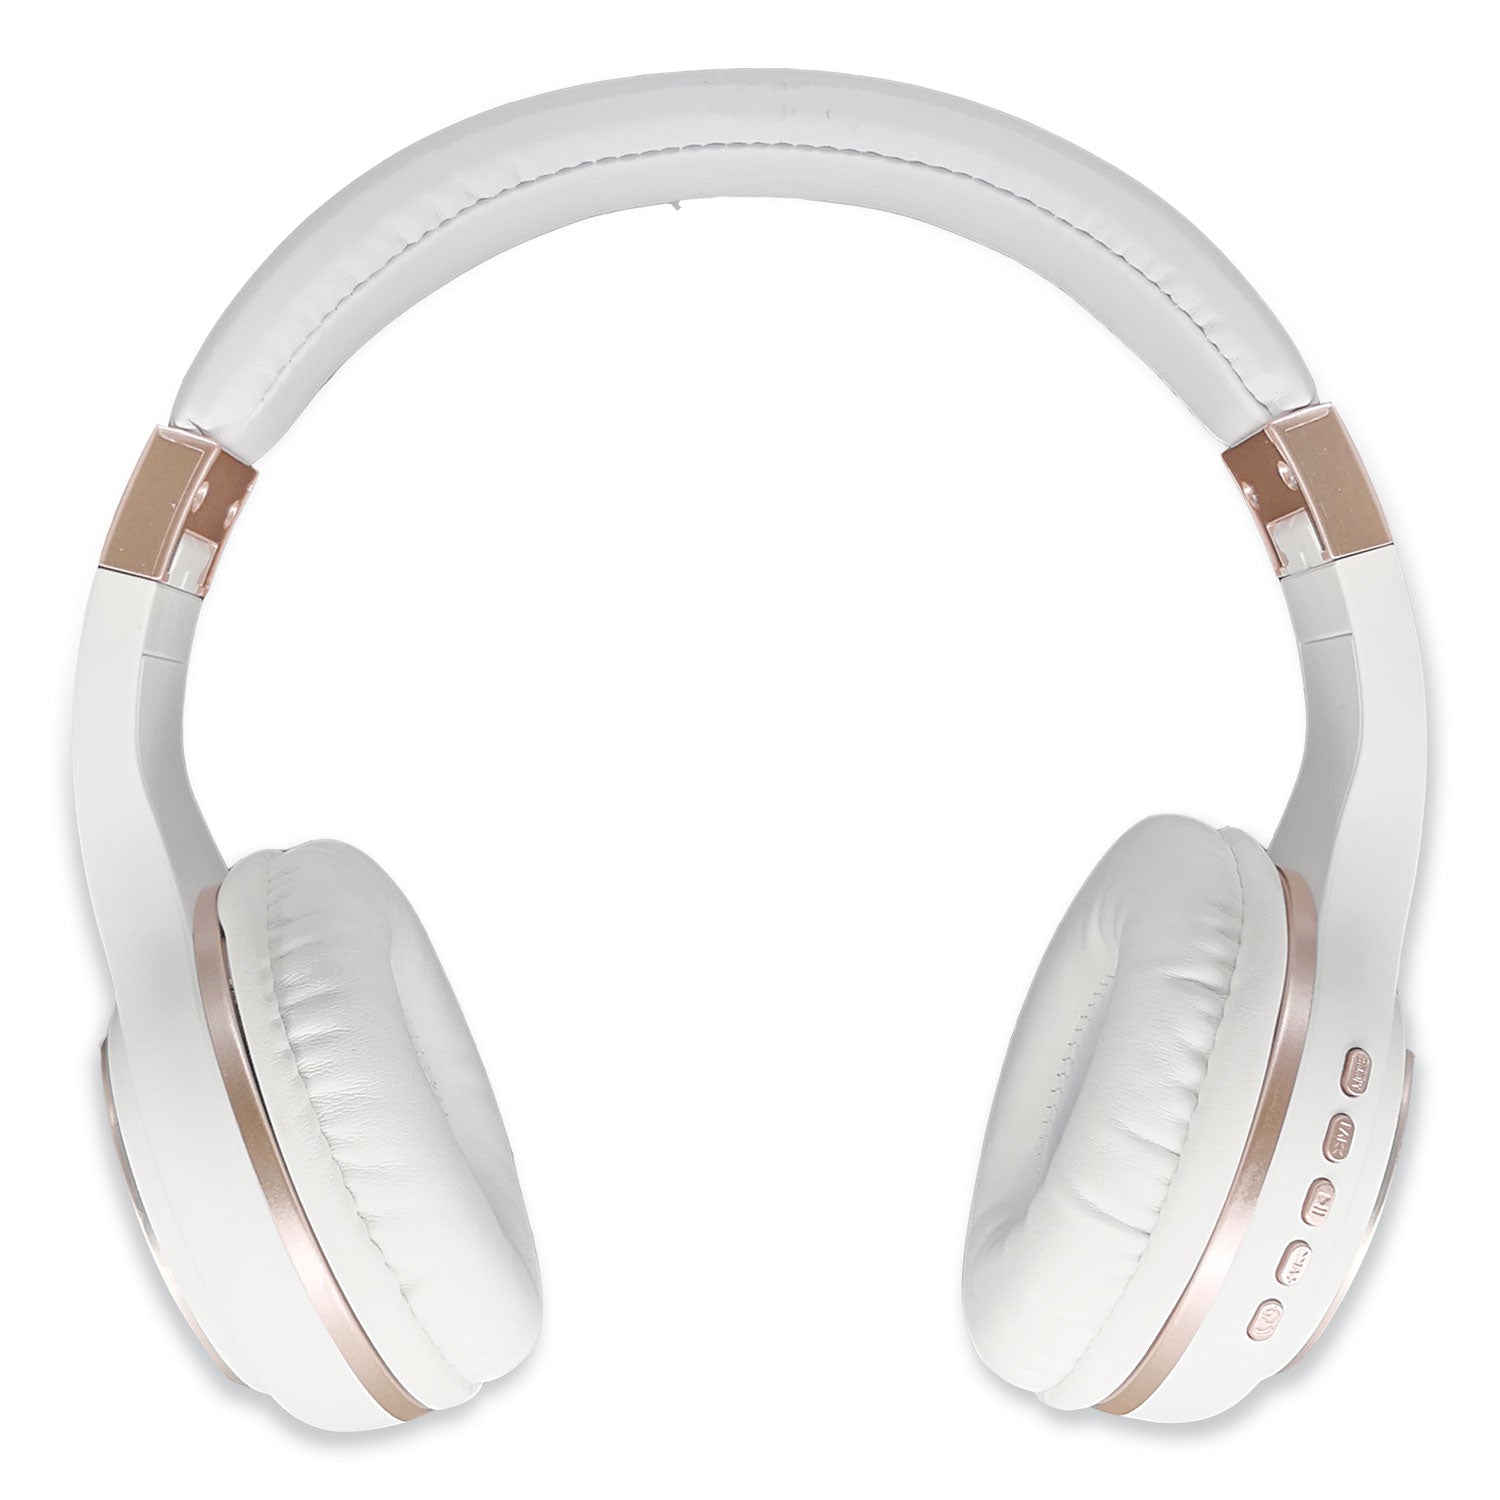 serenity-stereo-wireless-headphones-with-microphone-3-ft-cord-white-rose-gold_mhshp5500r - 2